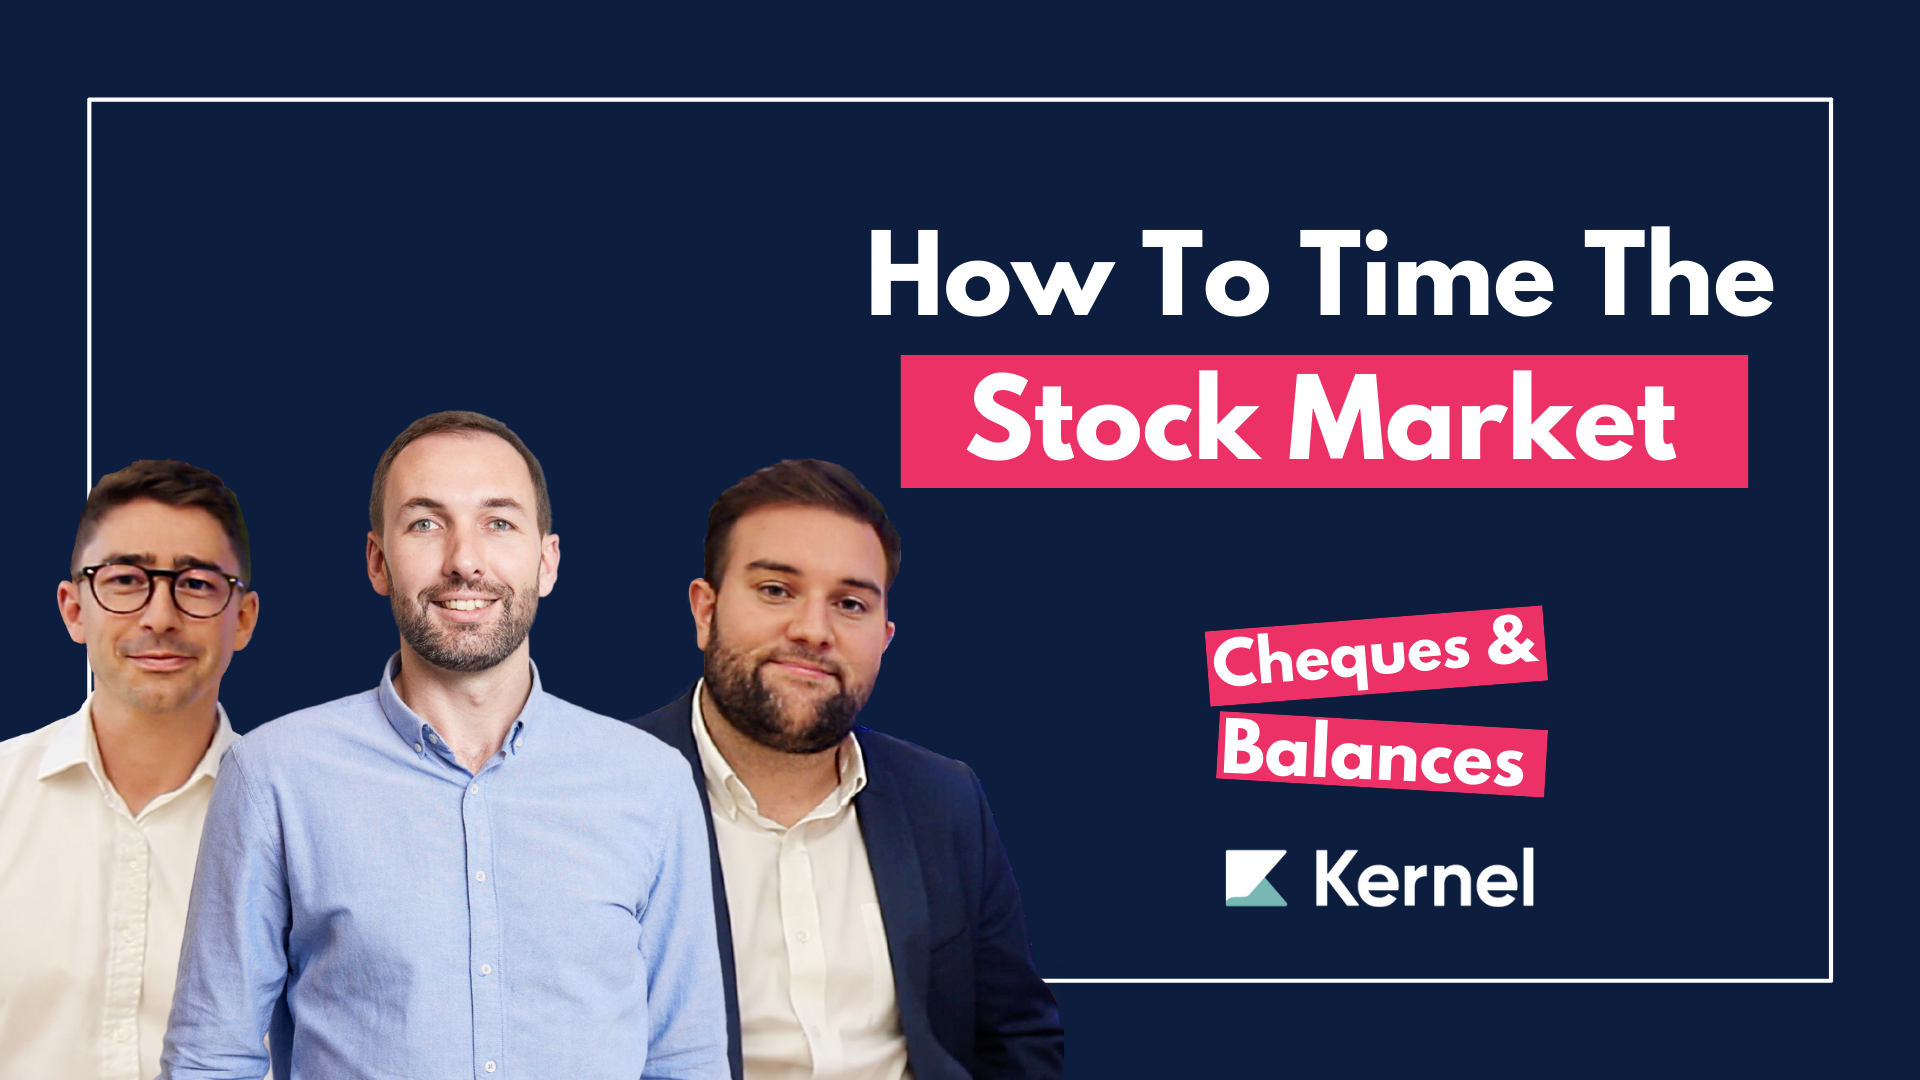 How To Time The Stock Market